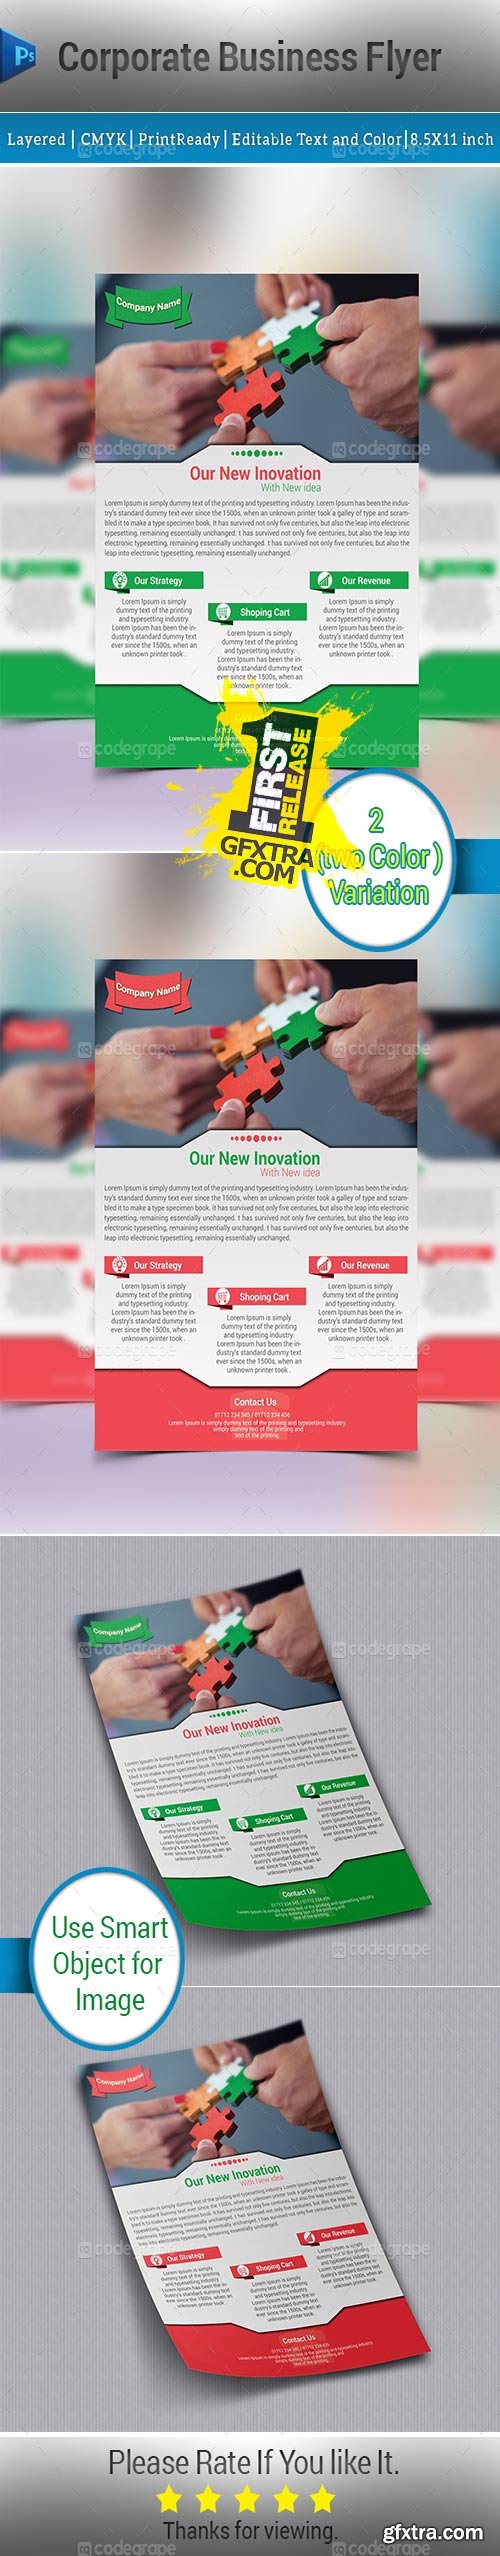 CodeGrape - Corporate Business Flyer (2 Colors) 5454